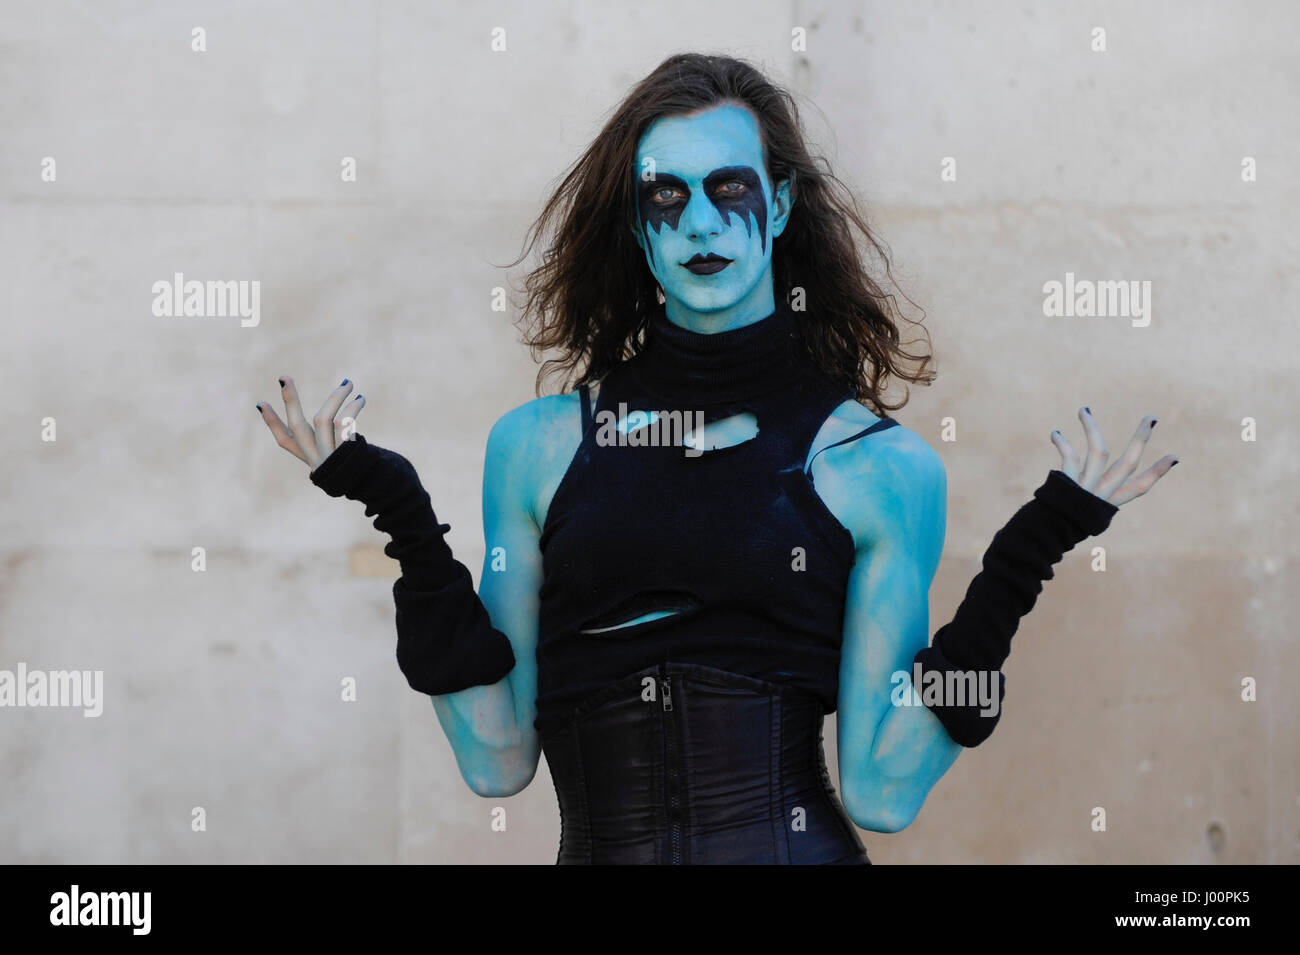 Brutal Legend High Resolution Stock Photography and Images - Alamy